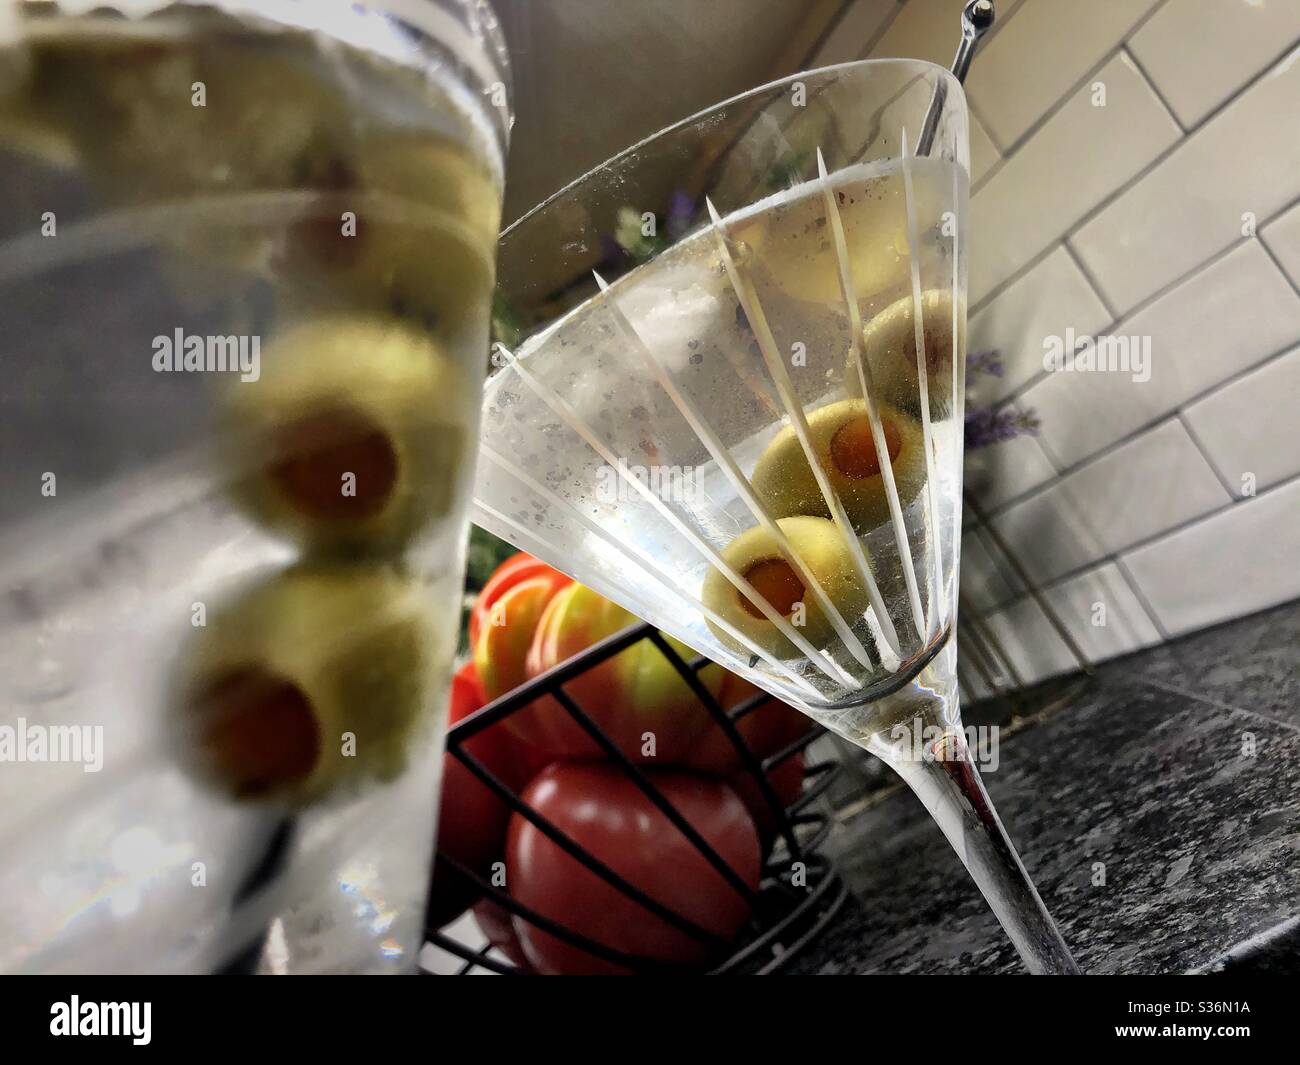 Bone dry martinis up with olives! Stock Photo